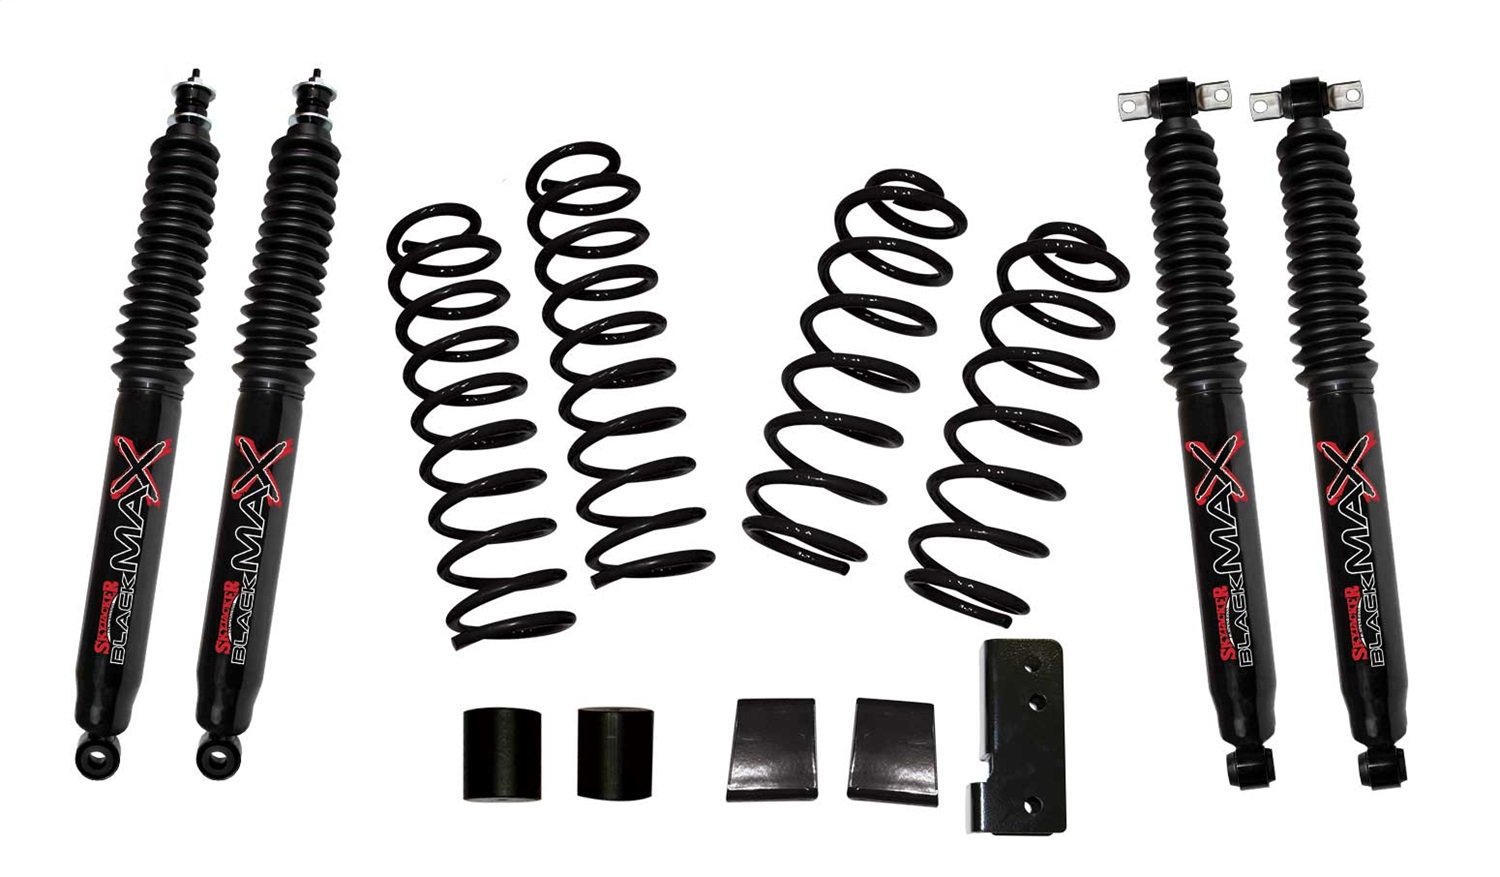 JK200BPBSR Front and Rear Suspension Lift Kit, Lift Amount: 2.5 in. Front/2.5 in. Rear